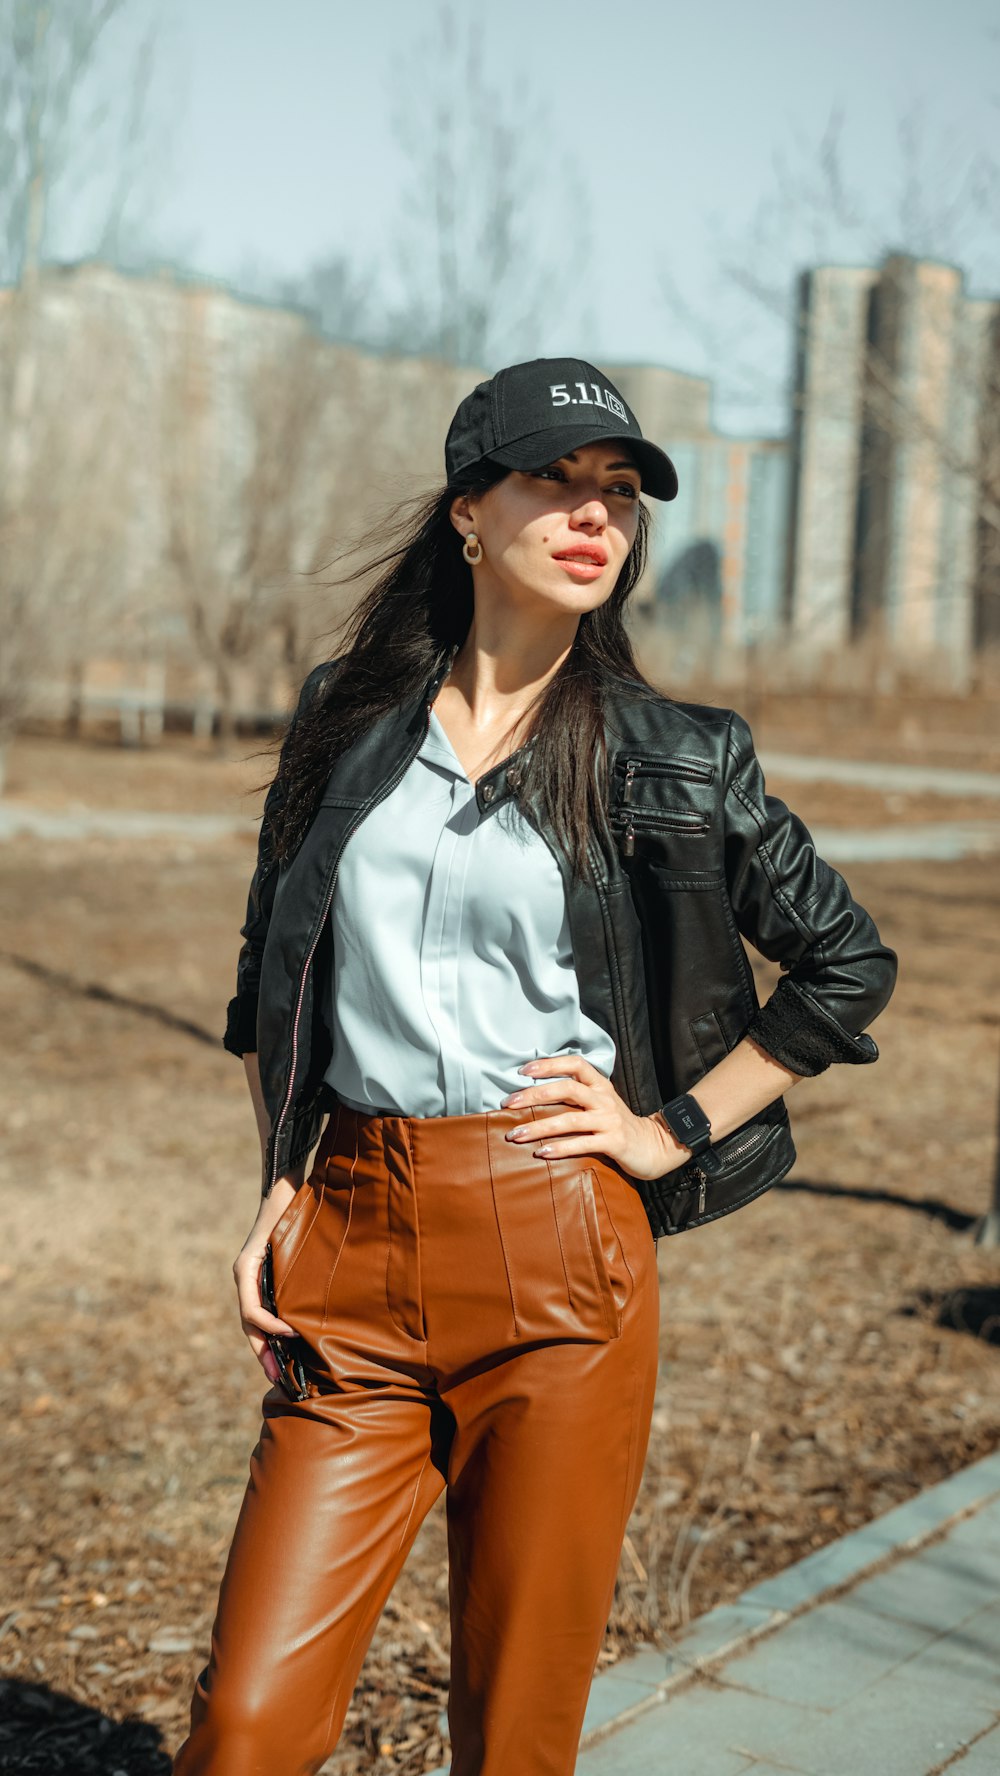 a woman wearing brown pants and a black hat